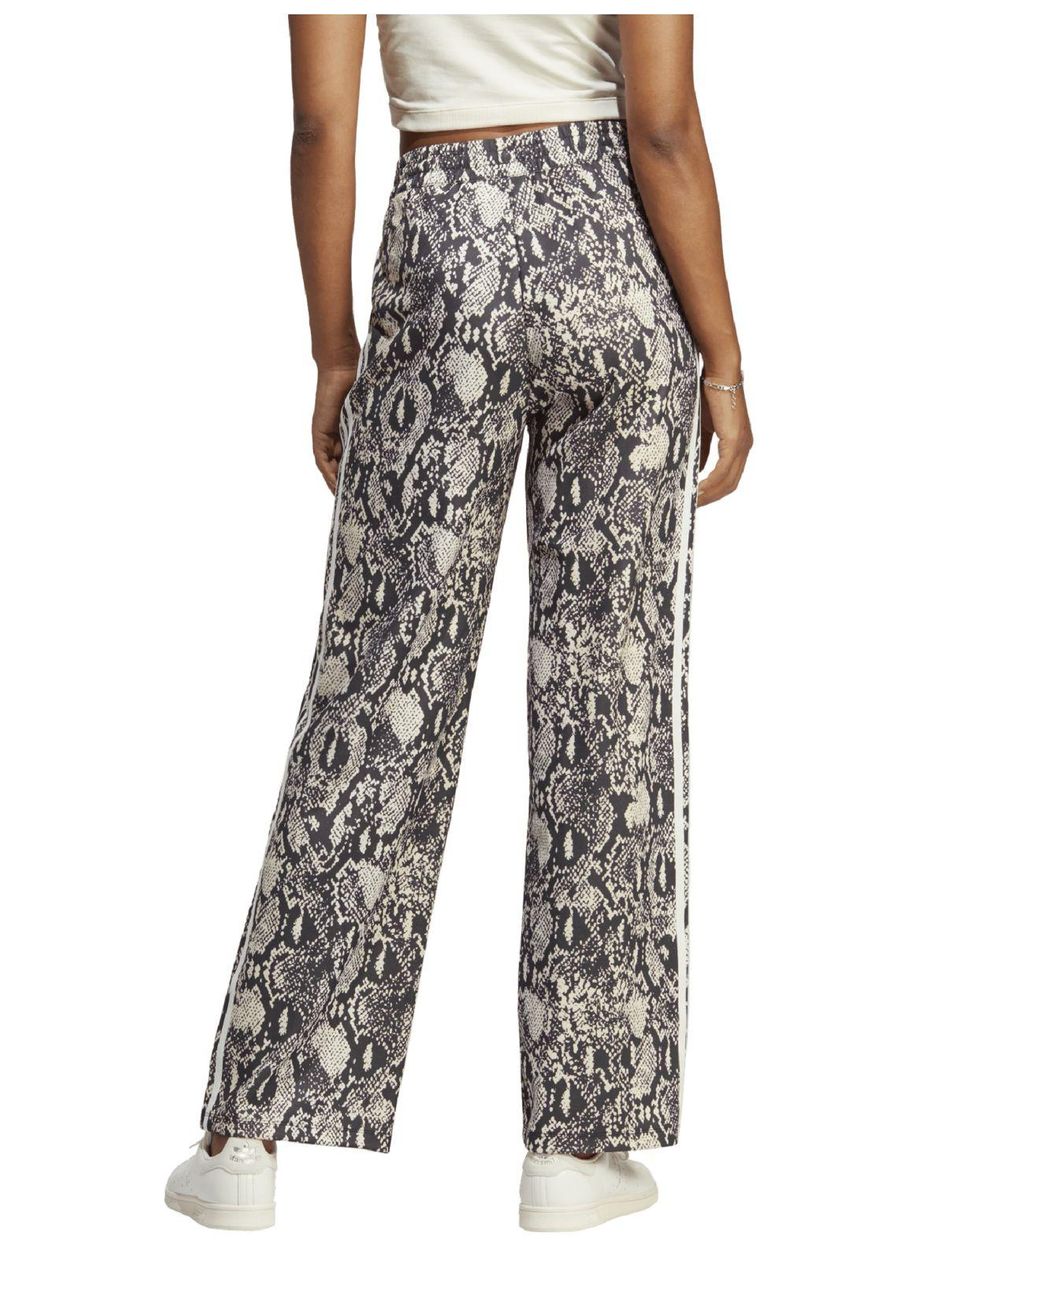 Python Print Pant with Stretch  The Broome  DuetteNYC